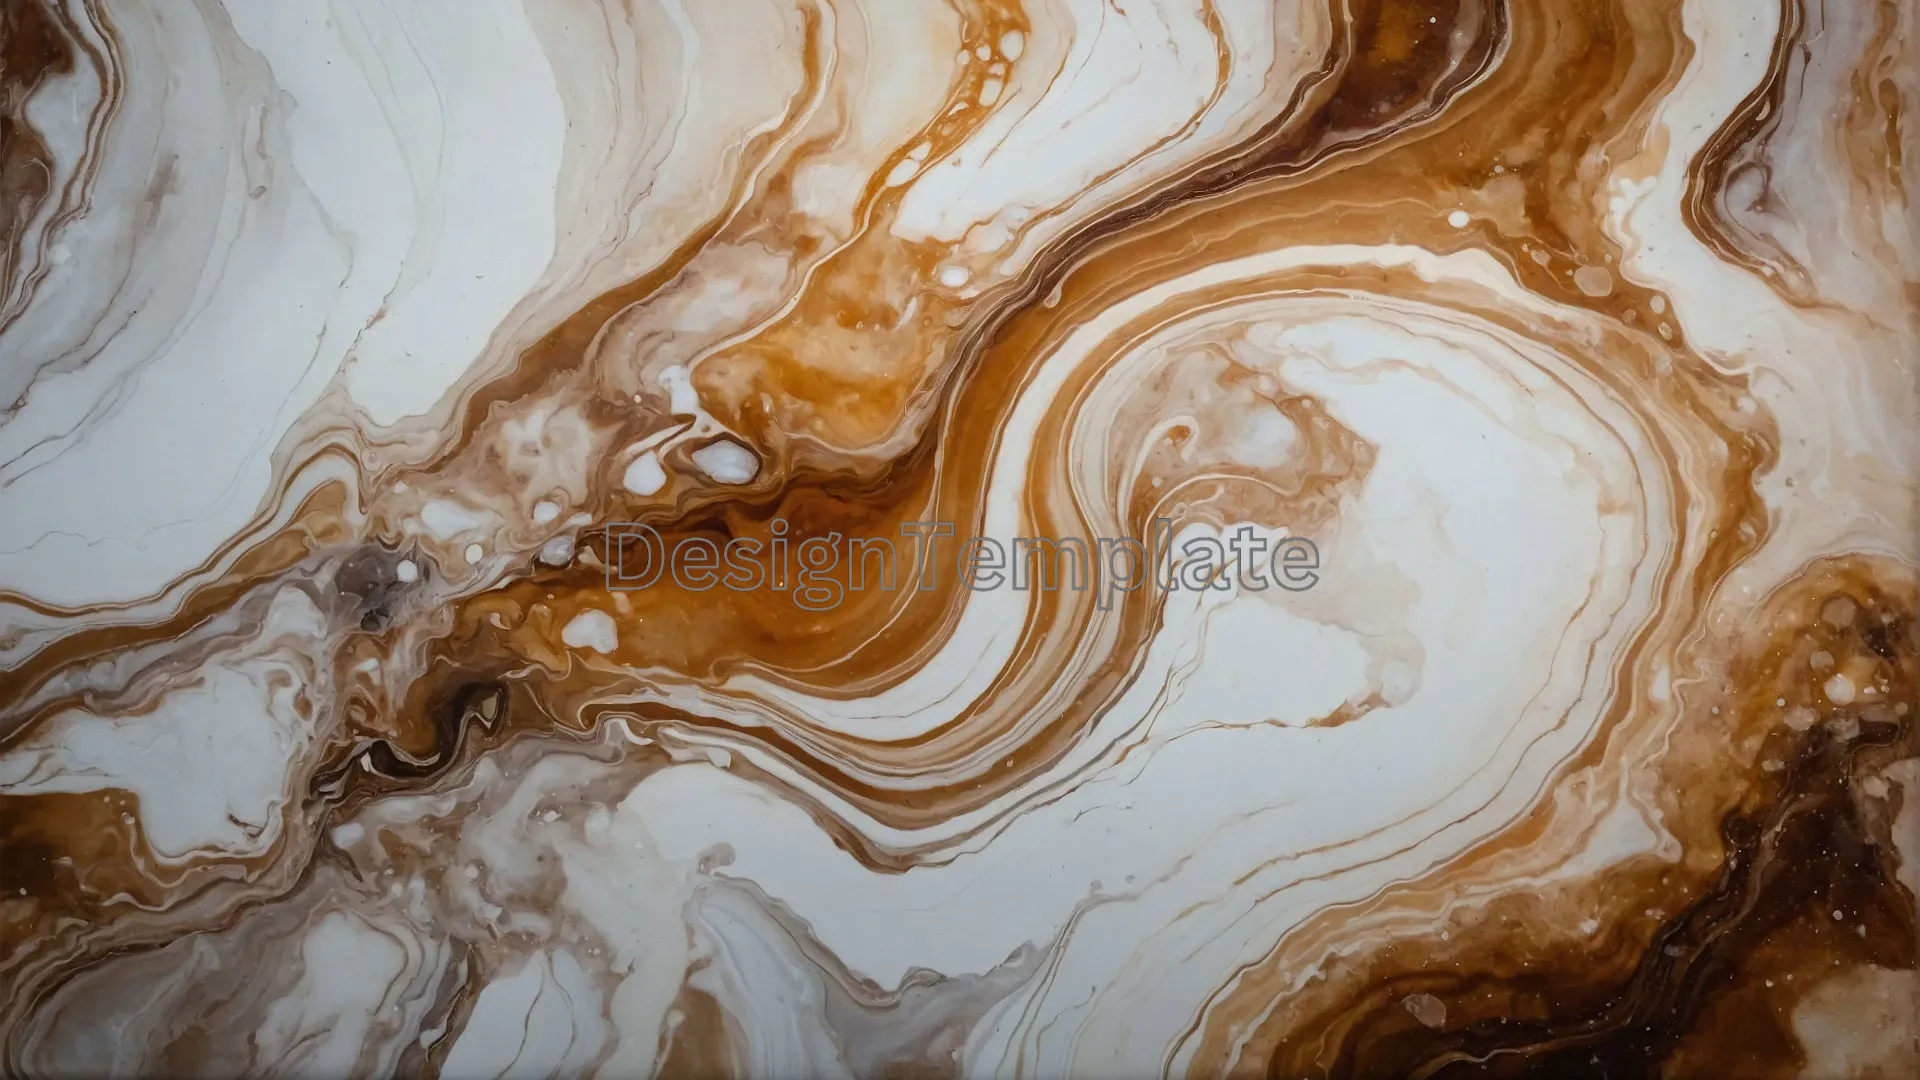 Abstract Brown and White Marble Texture JPG